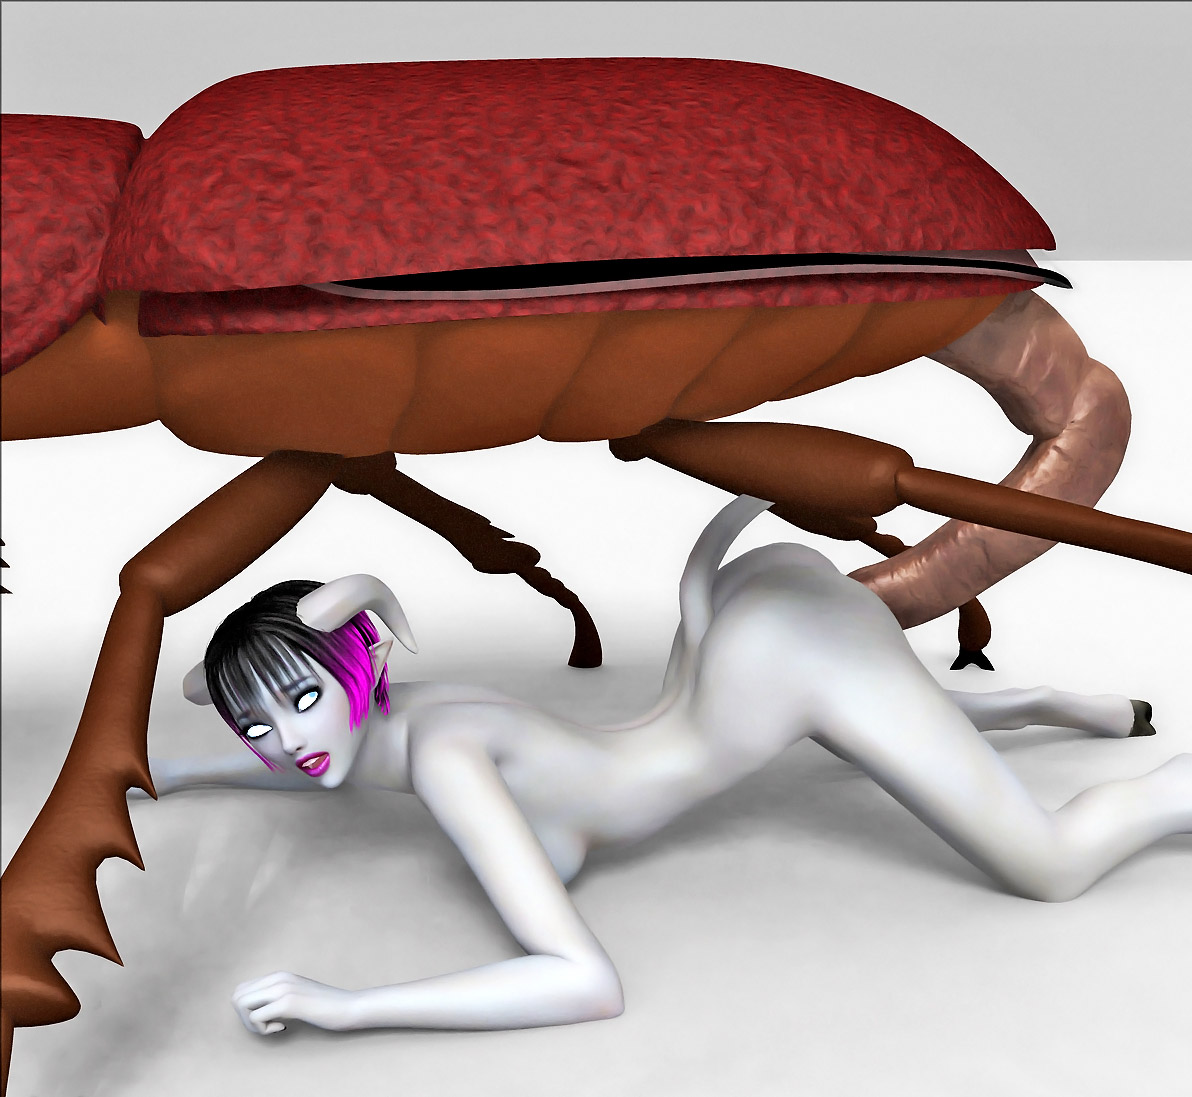 Insect Monster Hentai Porn - Hot horned elf girl getting fucked by a huge bug monster | Porncraft 3d